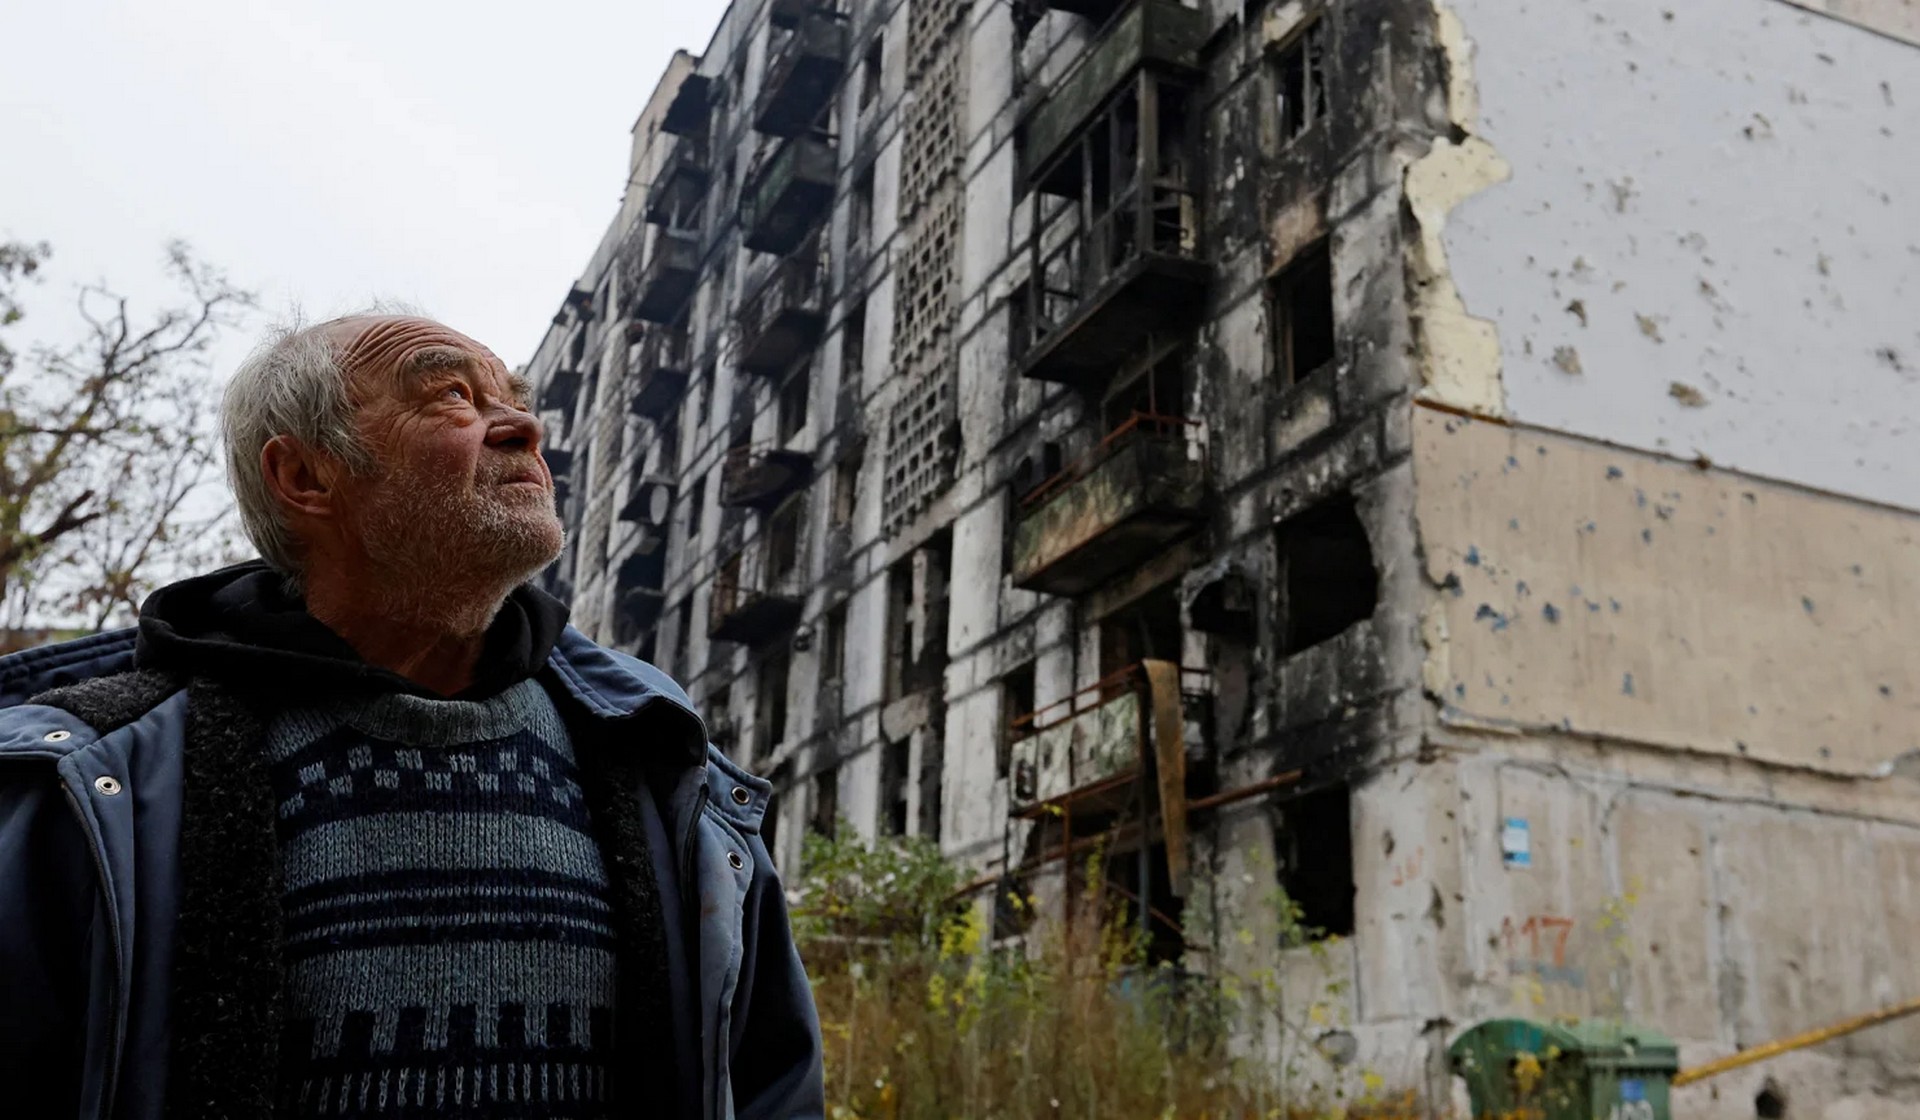 Local resident Pavel Shevtsov stands outside the apartment building where he lives in the basement with his wife Galina after their flat was destroyed in March in Mariupol